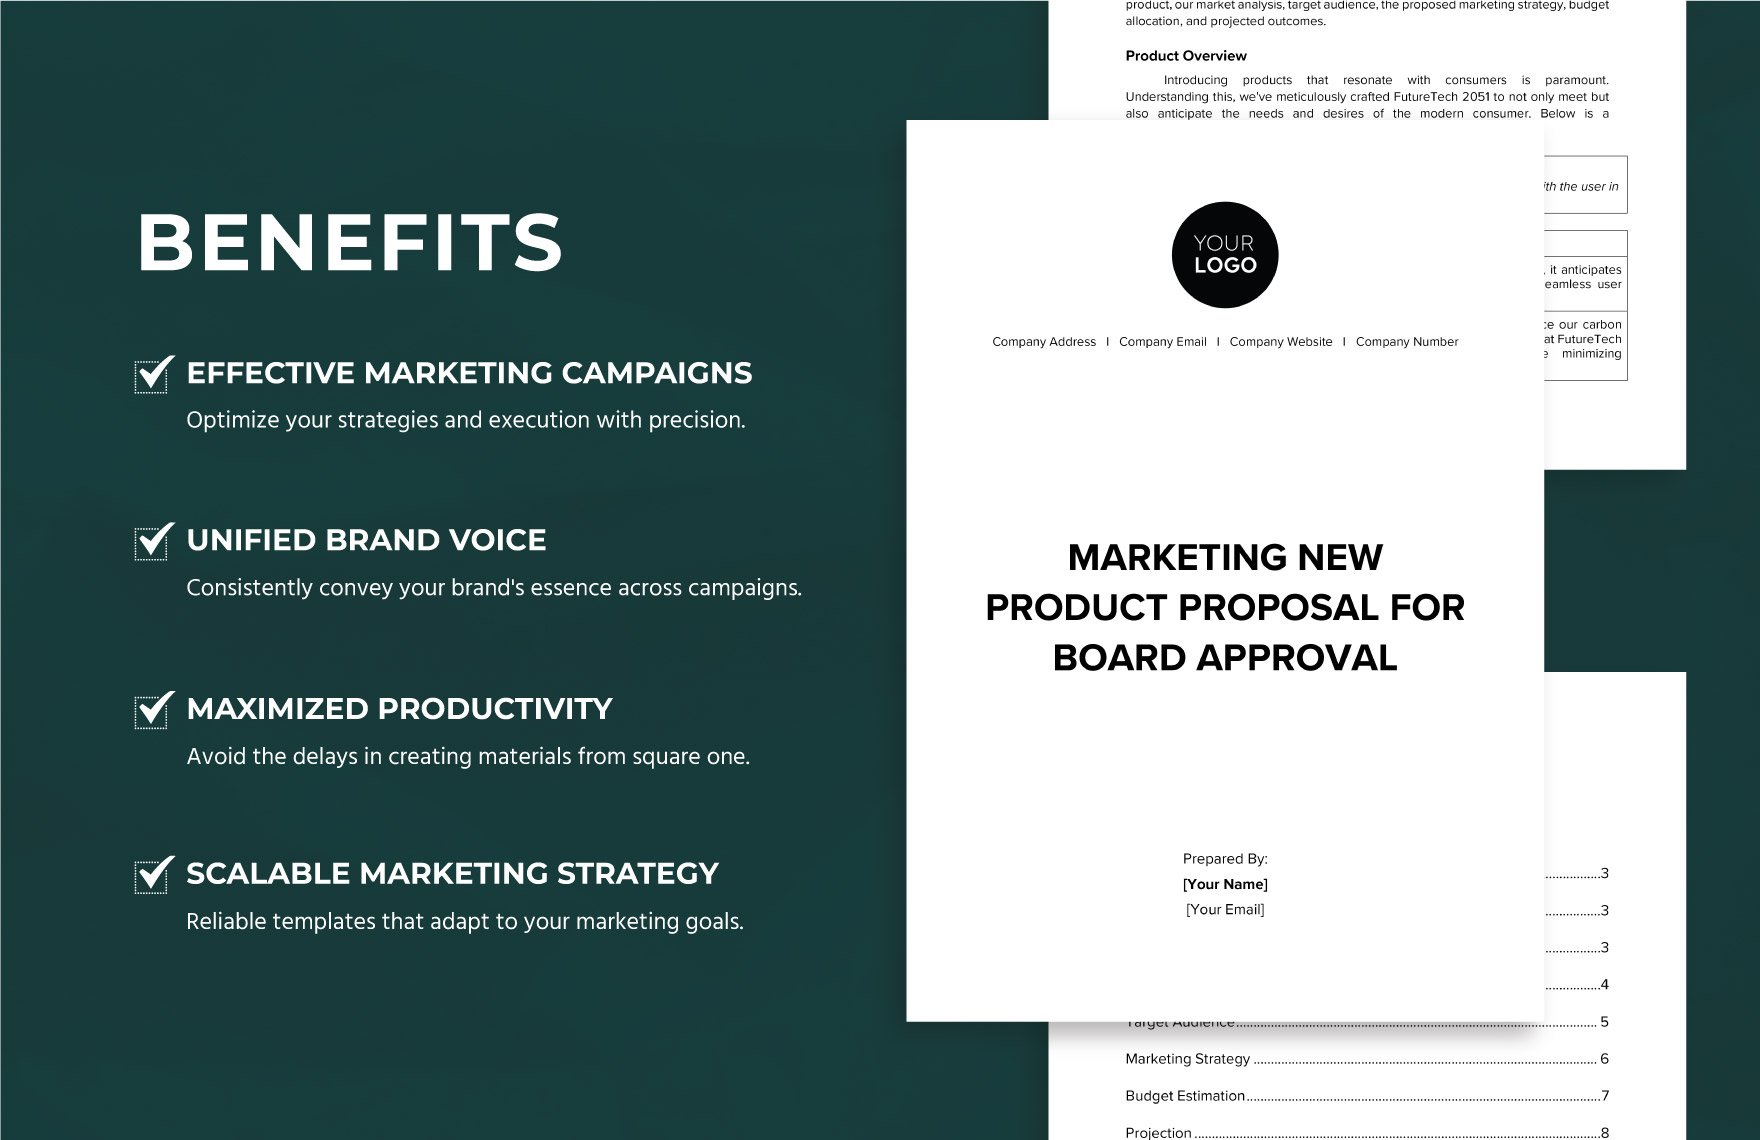 Marketing New Product Proposal for Board Approval Template